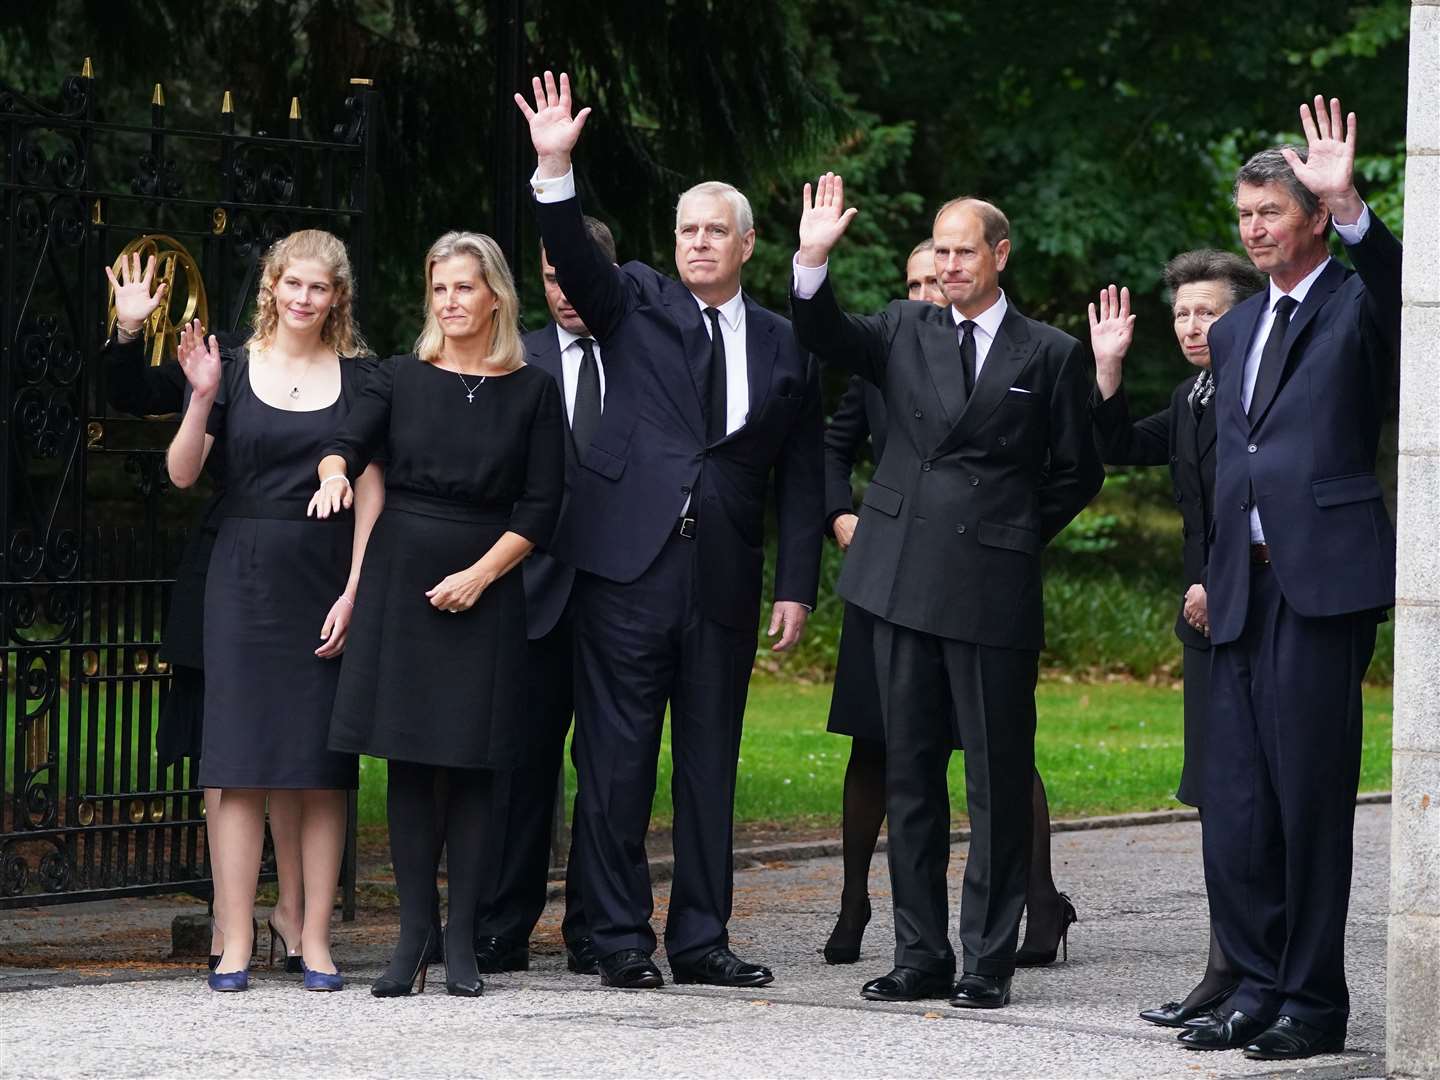 (Left-right) Lady Louise Windsor, the Countess of Wessex, Peter Phillips (hidden), the Duke of York, Zara Tindall (hidden), the Earl of Wessex, the Princess Royal and Vice Admiral Timothy Laurence wave to well-wishers outside Balmoral (Owen Humphreys/PA)